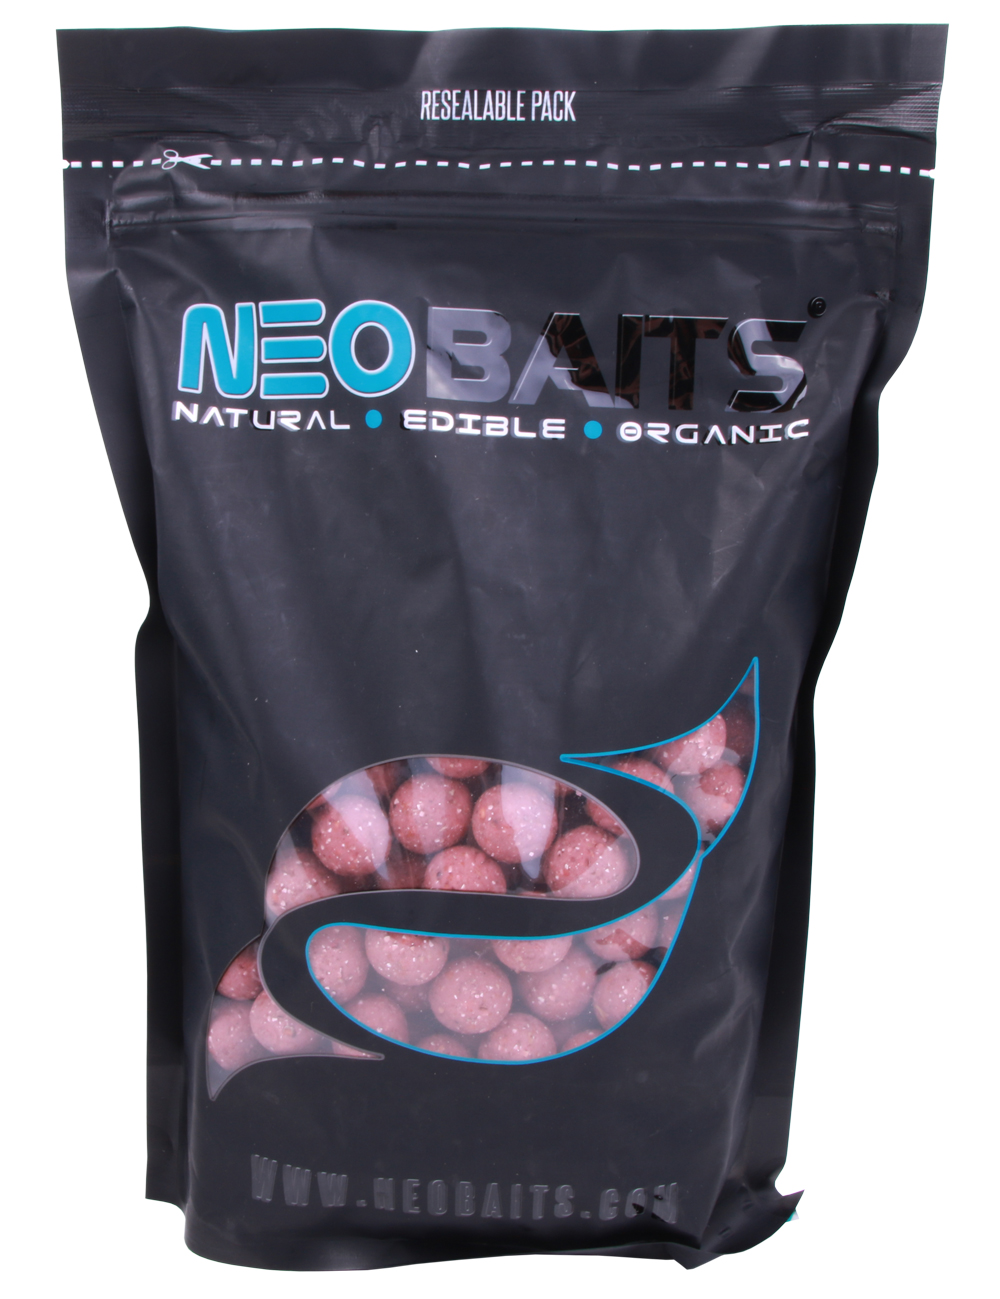 Neo-Baits Readymades 'Spicy Fish' 20mm (1kg)